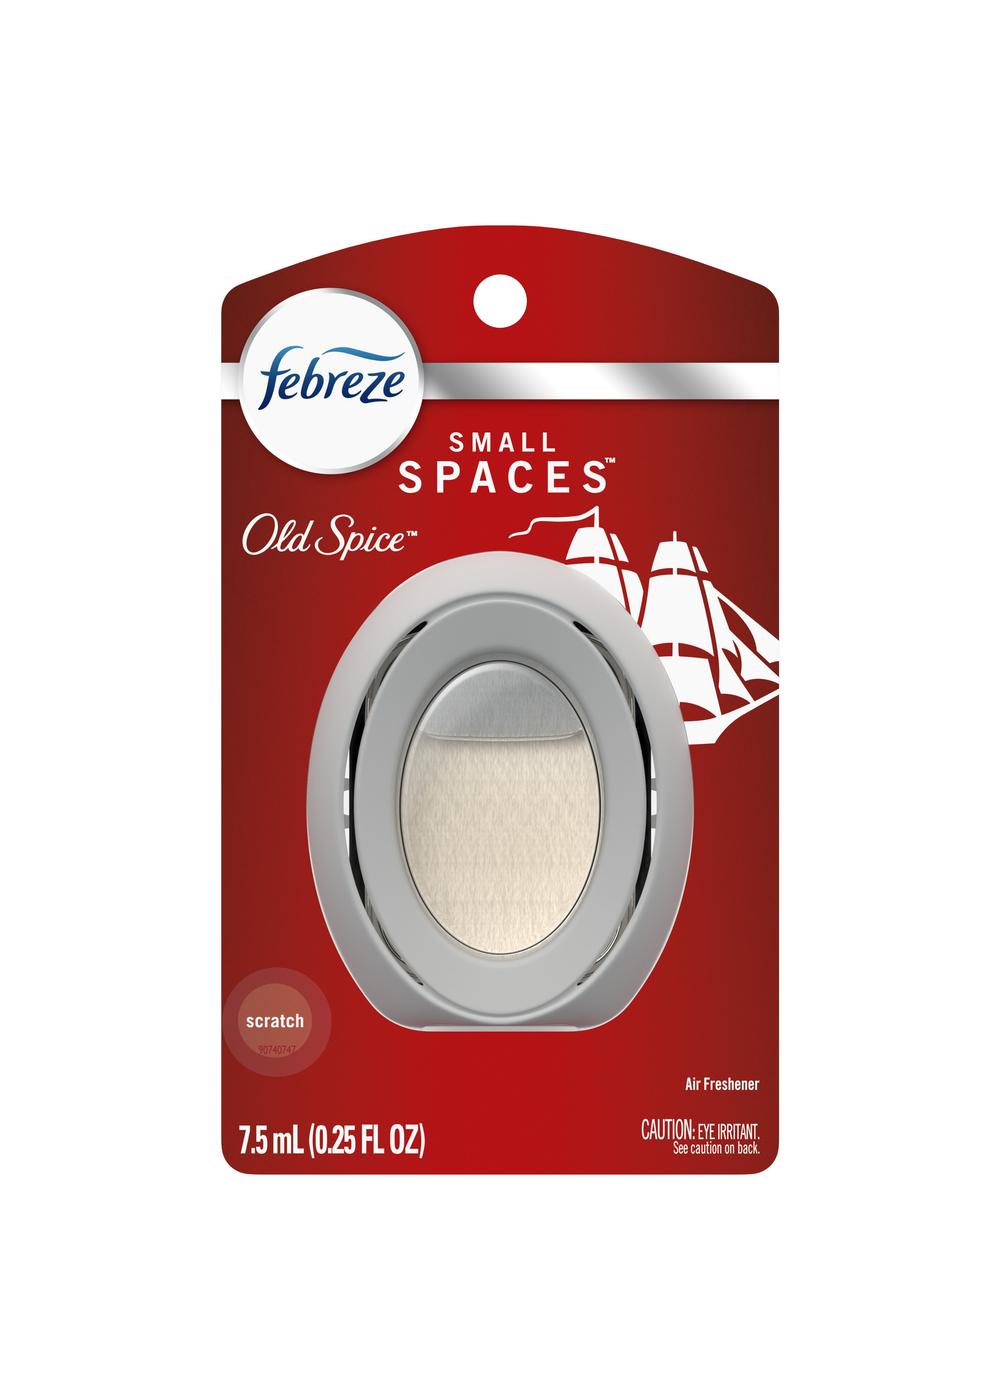 Febreze Small Spaces Old Spice Air Freshener; image 1 of 2